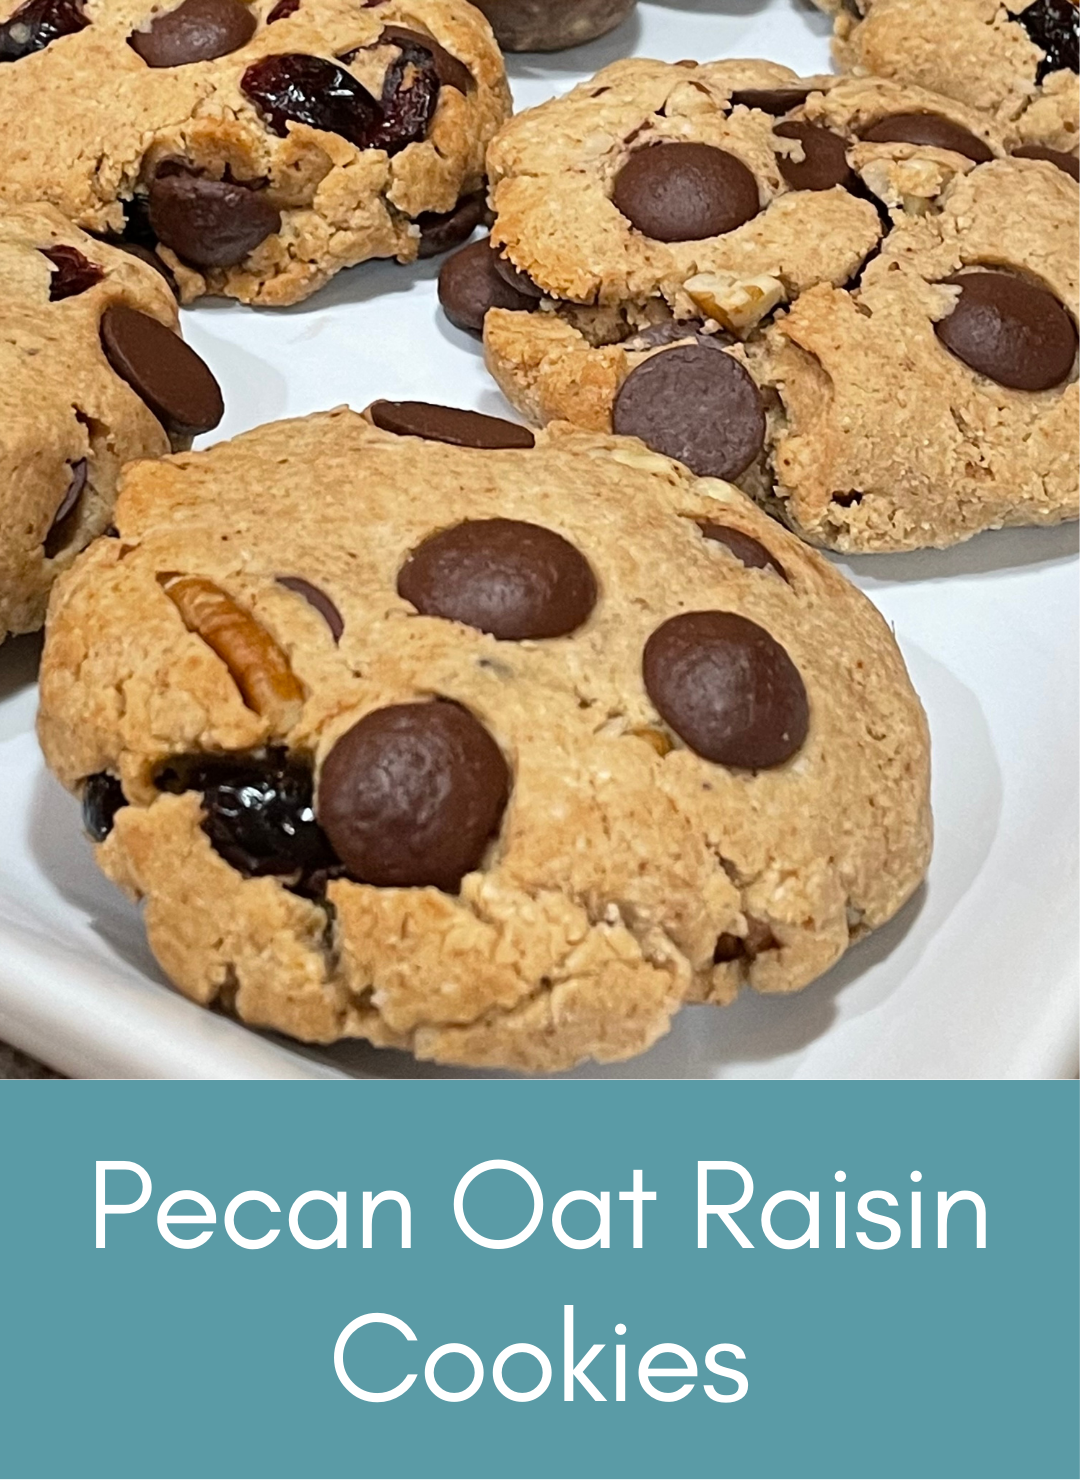 Whole food plant based pecan oat and raisin vegan cookies Picture with link to recipe